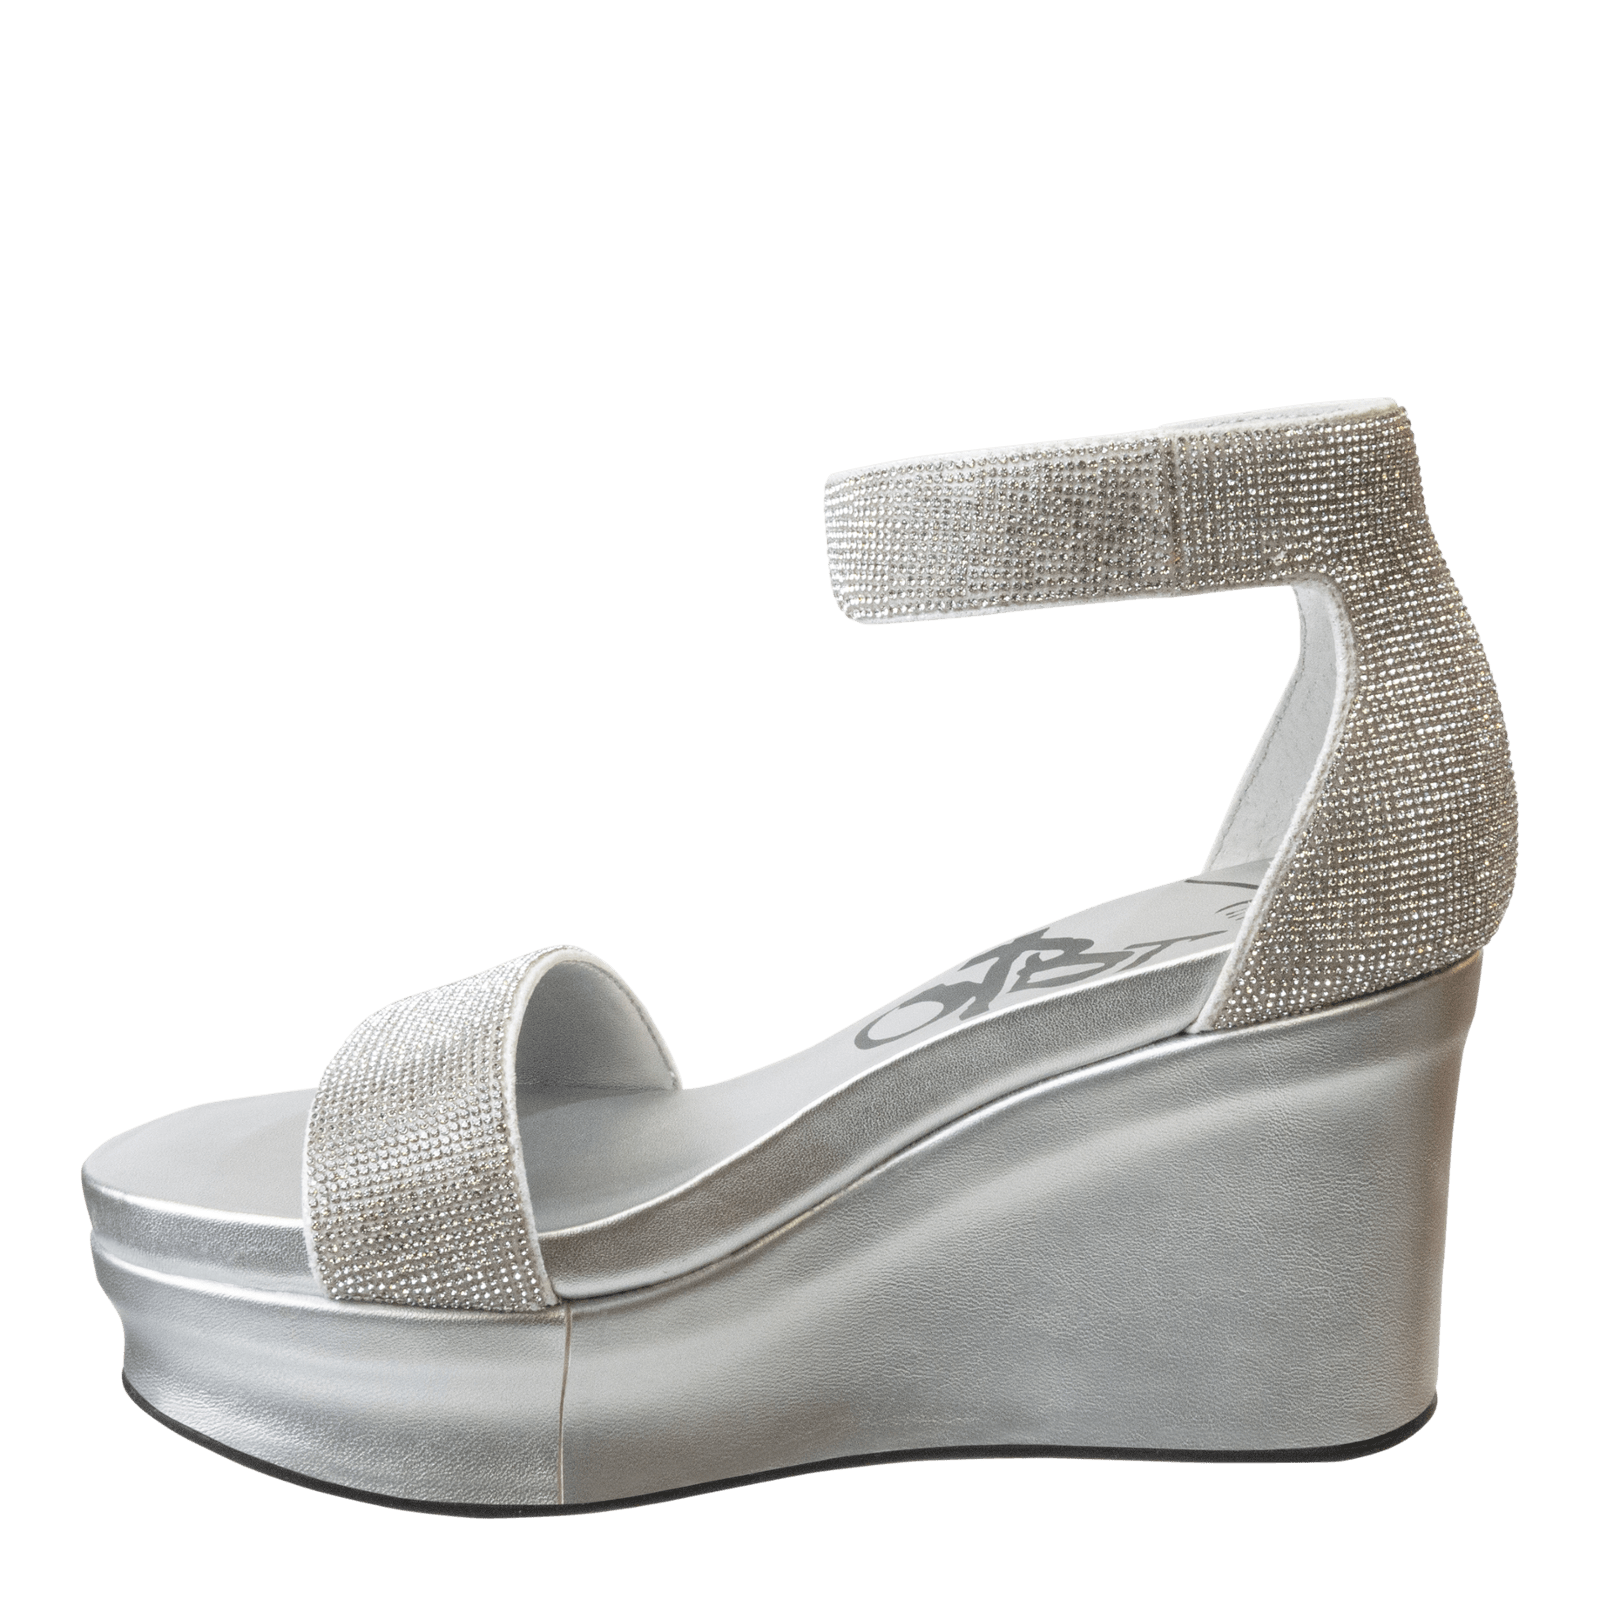 What are the main differences between heels and wedges? - Quora